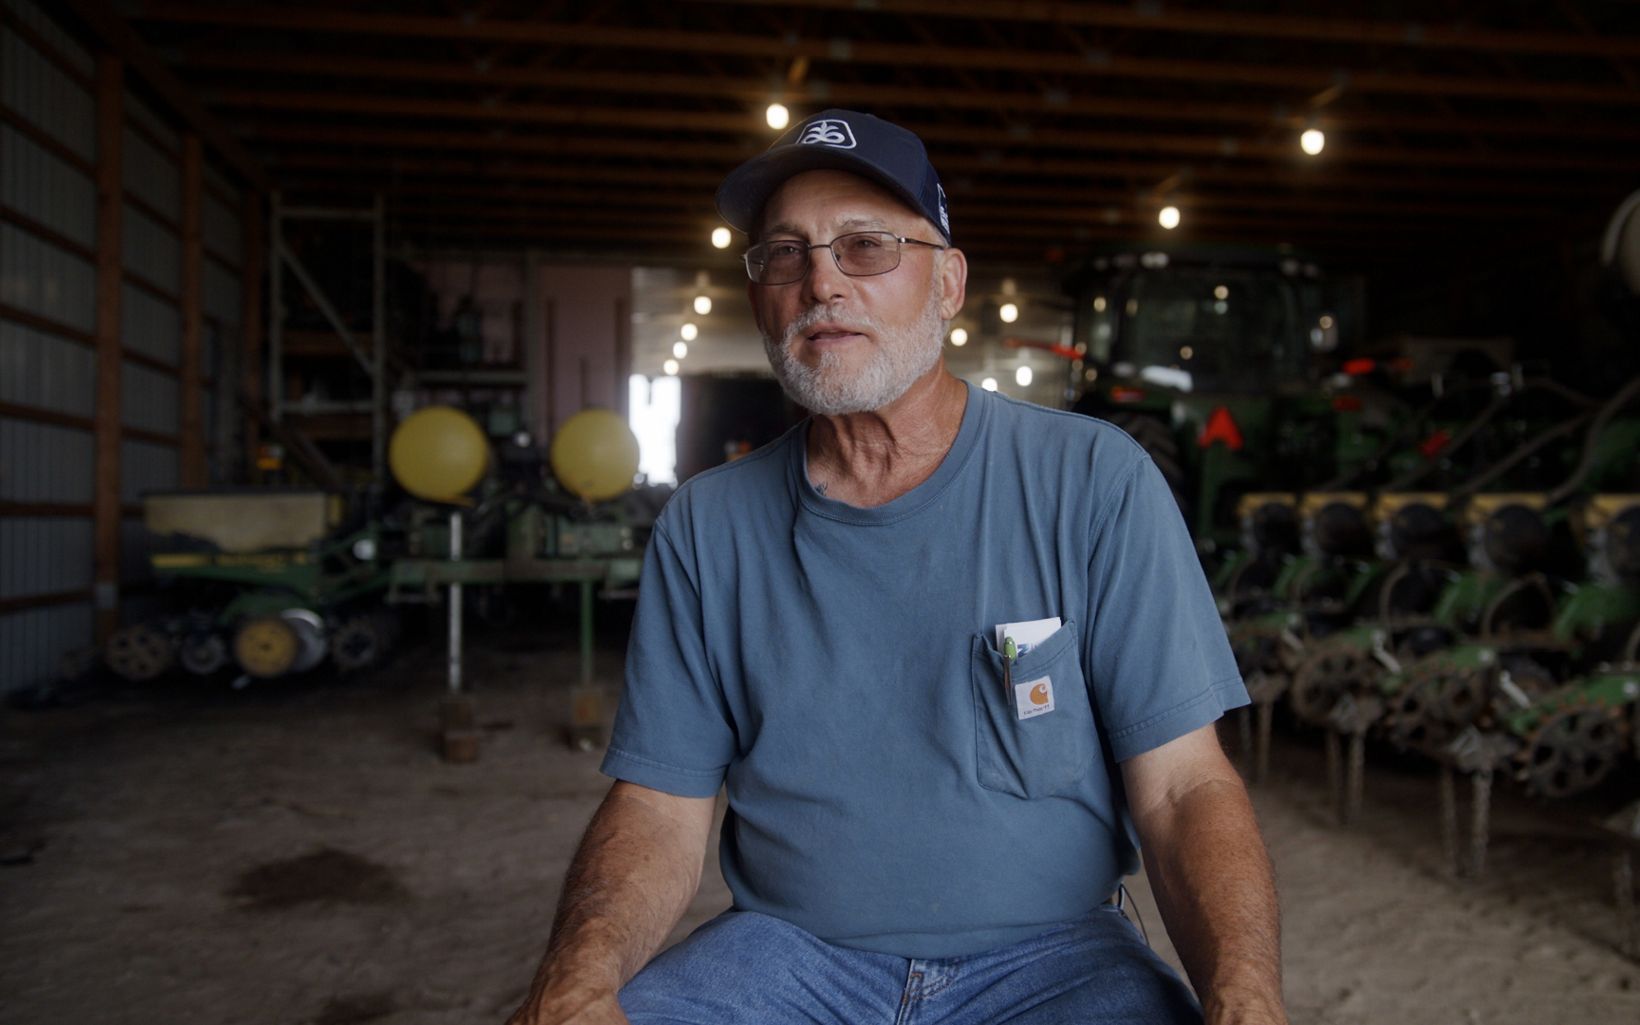 Don Morse sits in a barn, surrounded by equipment.